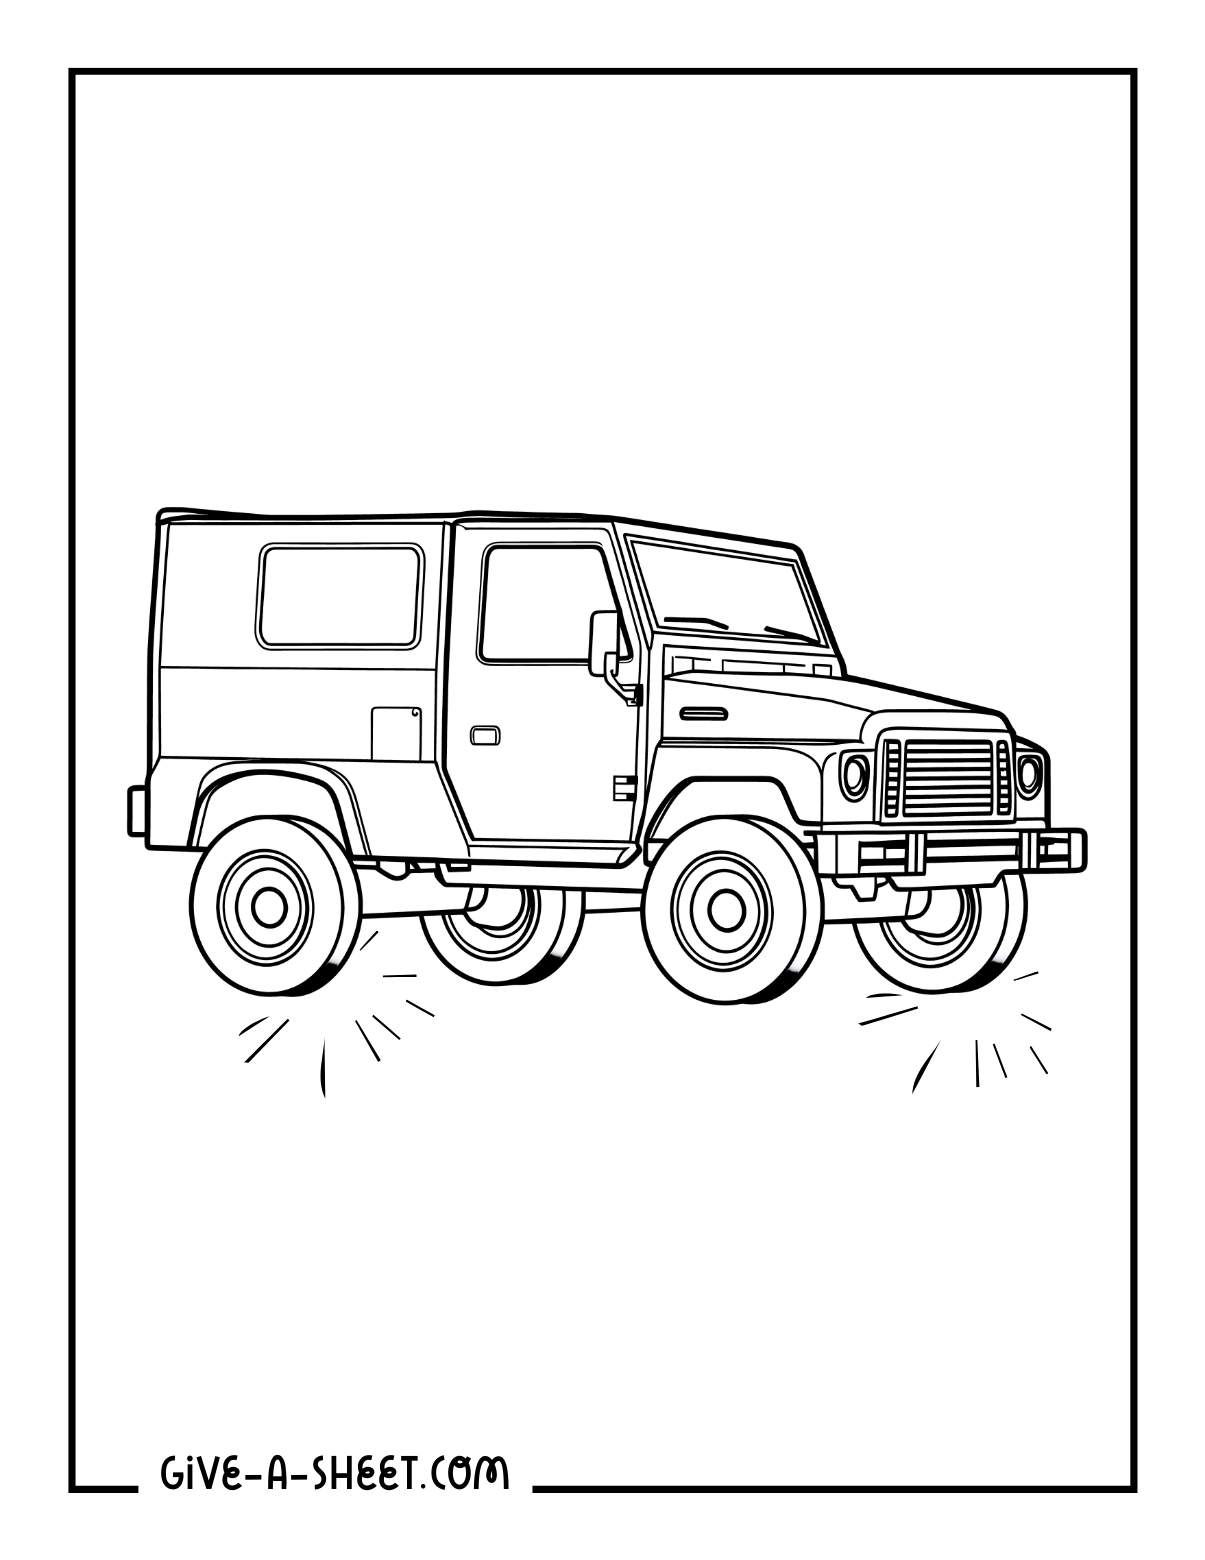 Army truck illustration coloring page for kids.